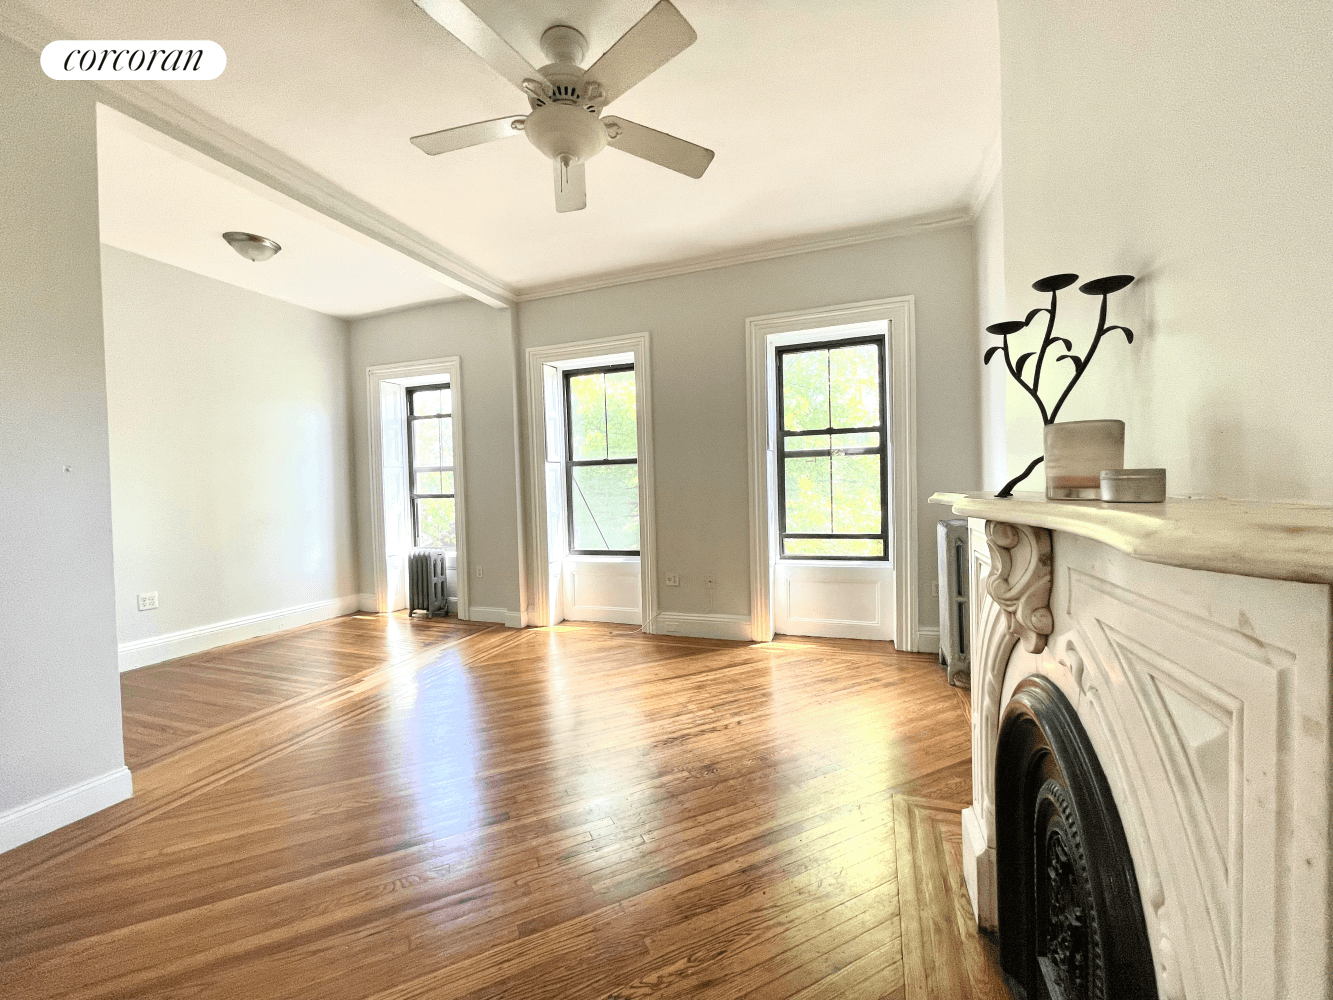 GORGEOUS, amazingly SPACIOUS 1bedroom full floor unit in beautiful Brooklyn brownstone townhome, located in prime Bedstuy location.